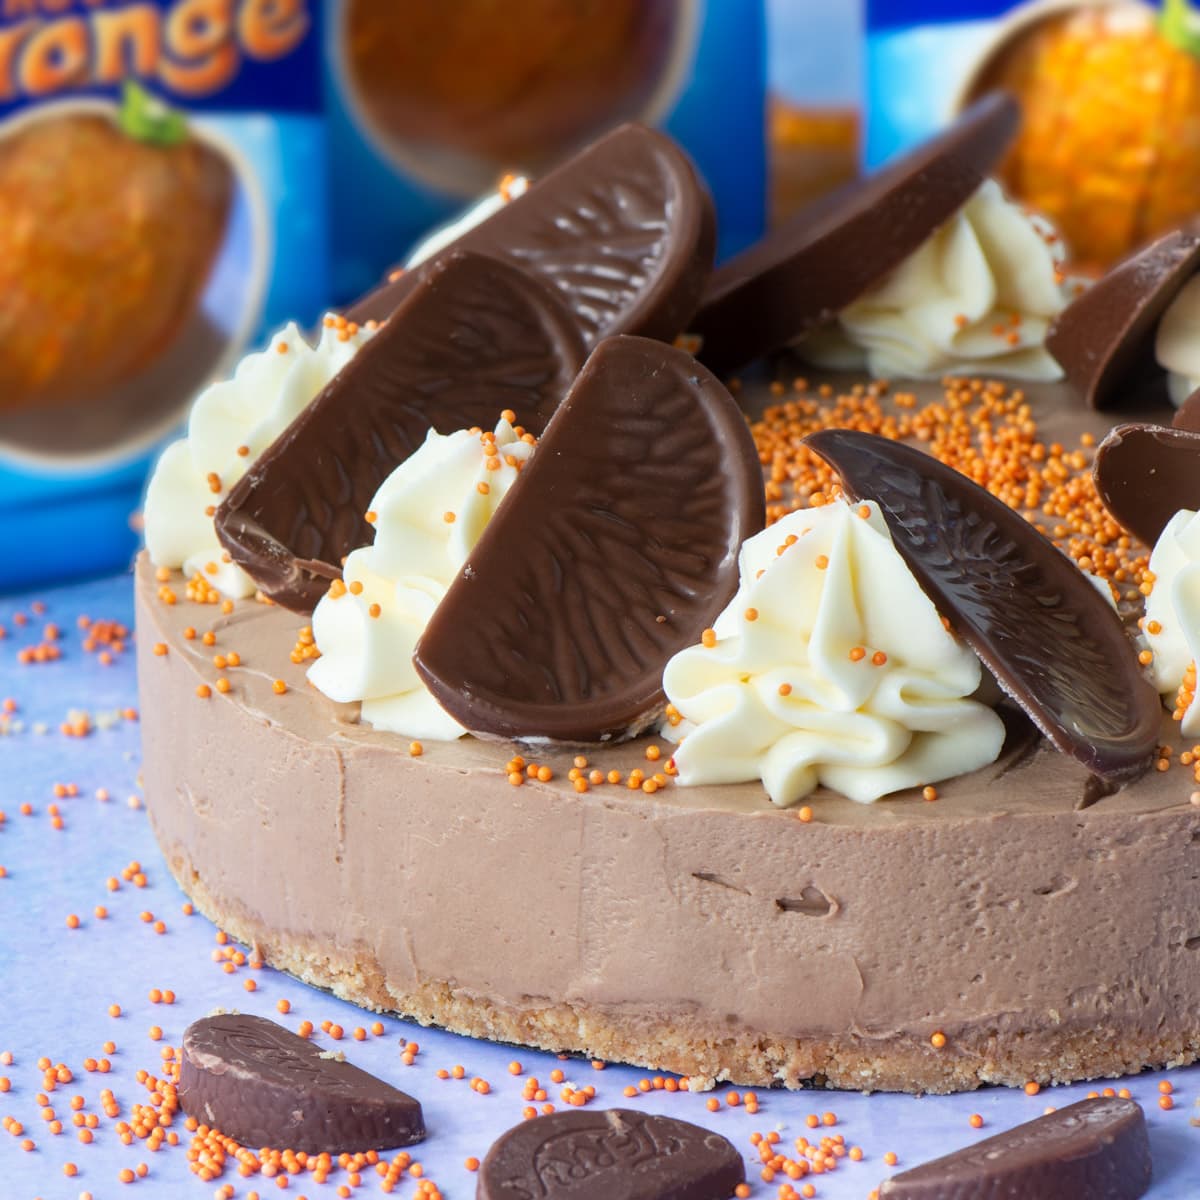 Chocolate Orange Cheesecake - A delicious and easy to make no-bake dessert. A smooth chocolate orange flavoured cheesecake topped with swirls of white chocolate orange cheesecake and slices of Chocolate Orange. A dessert lover's dream.